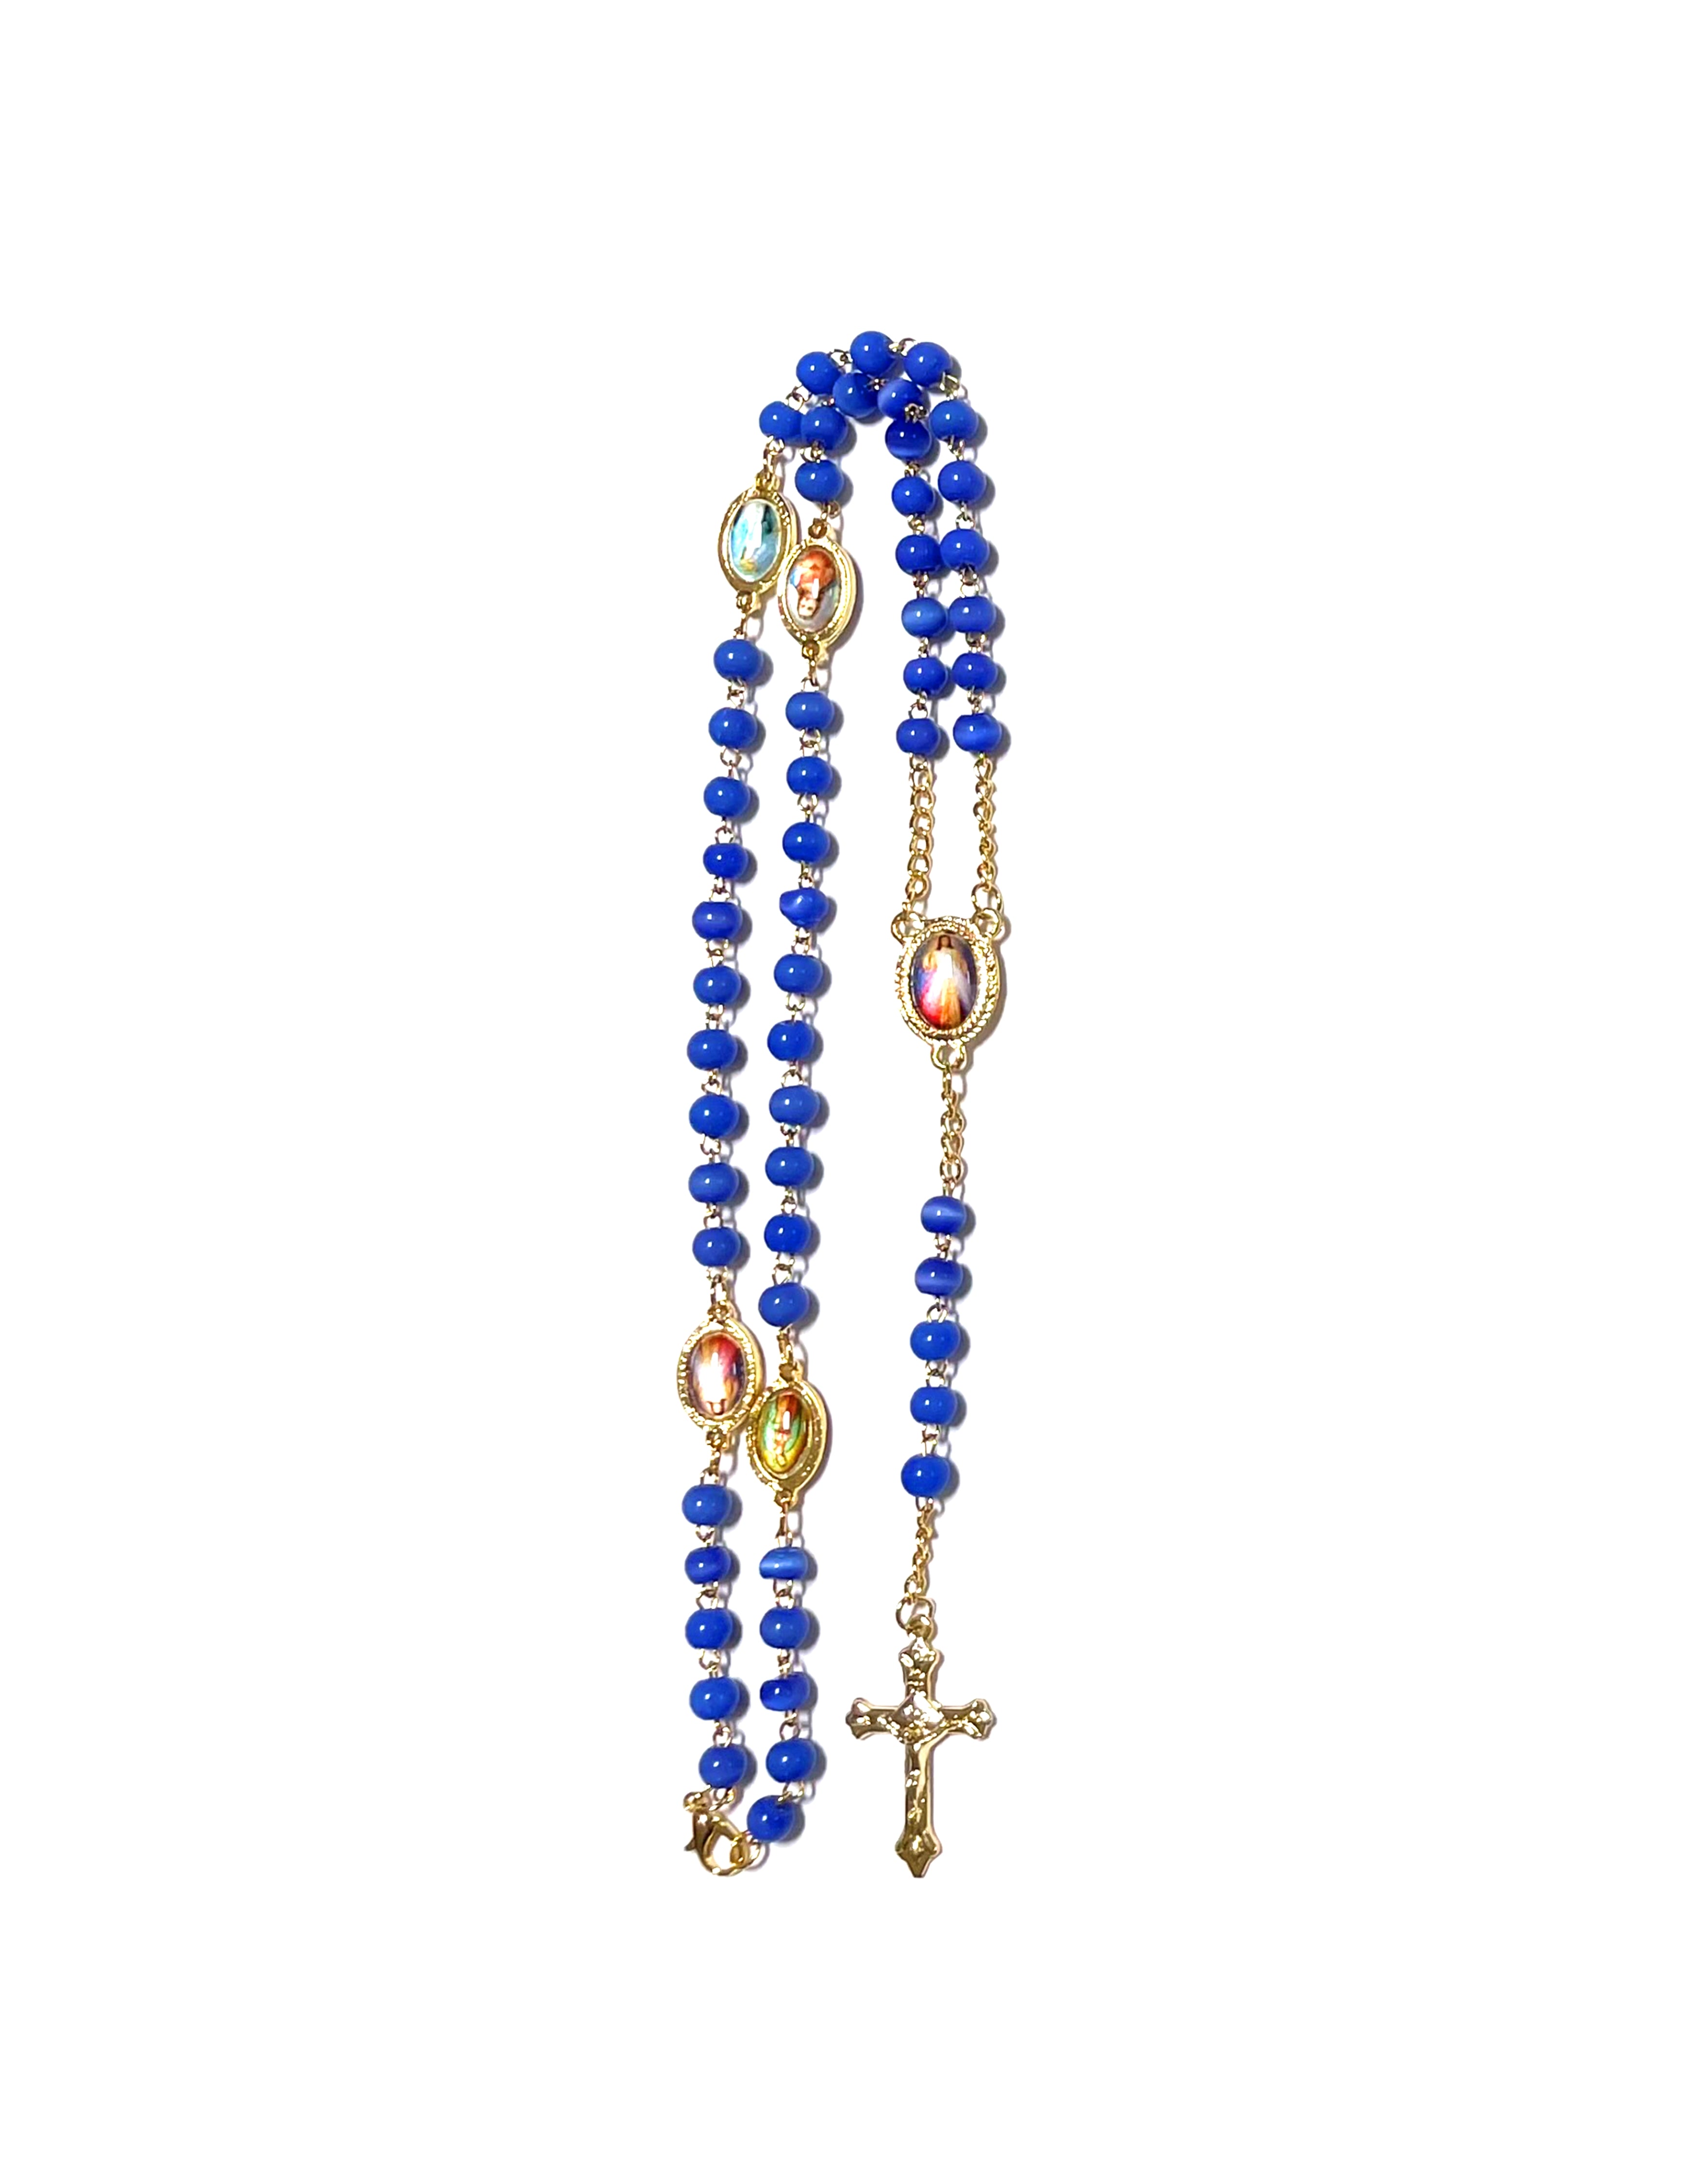 Cat's eye stone rosary with medals of various saints in each mystery